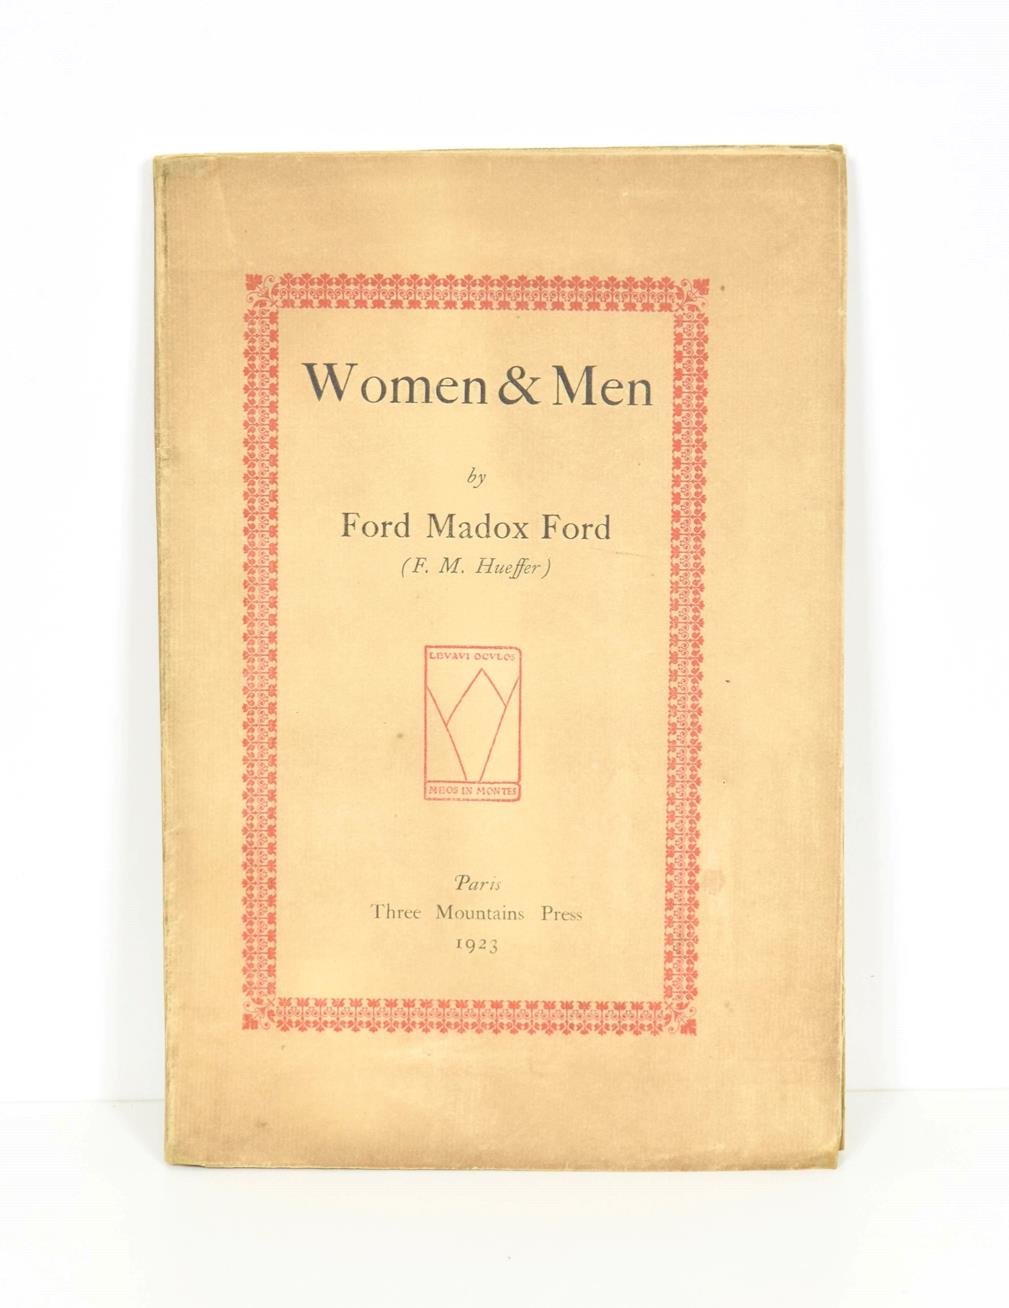 Lot 80 - Ford (Ford Madox)  Women & Men, Paris: Three Mountains Press, 1923, numbered limited edition...